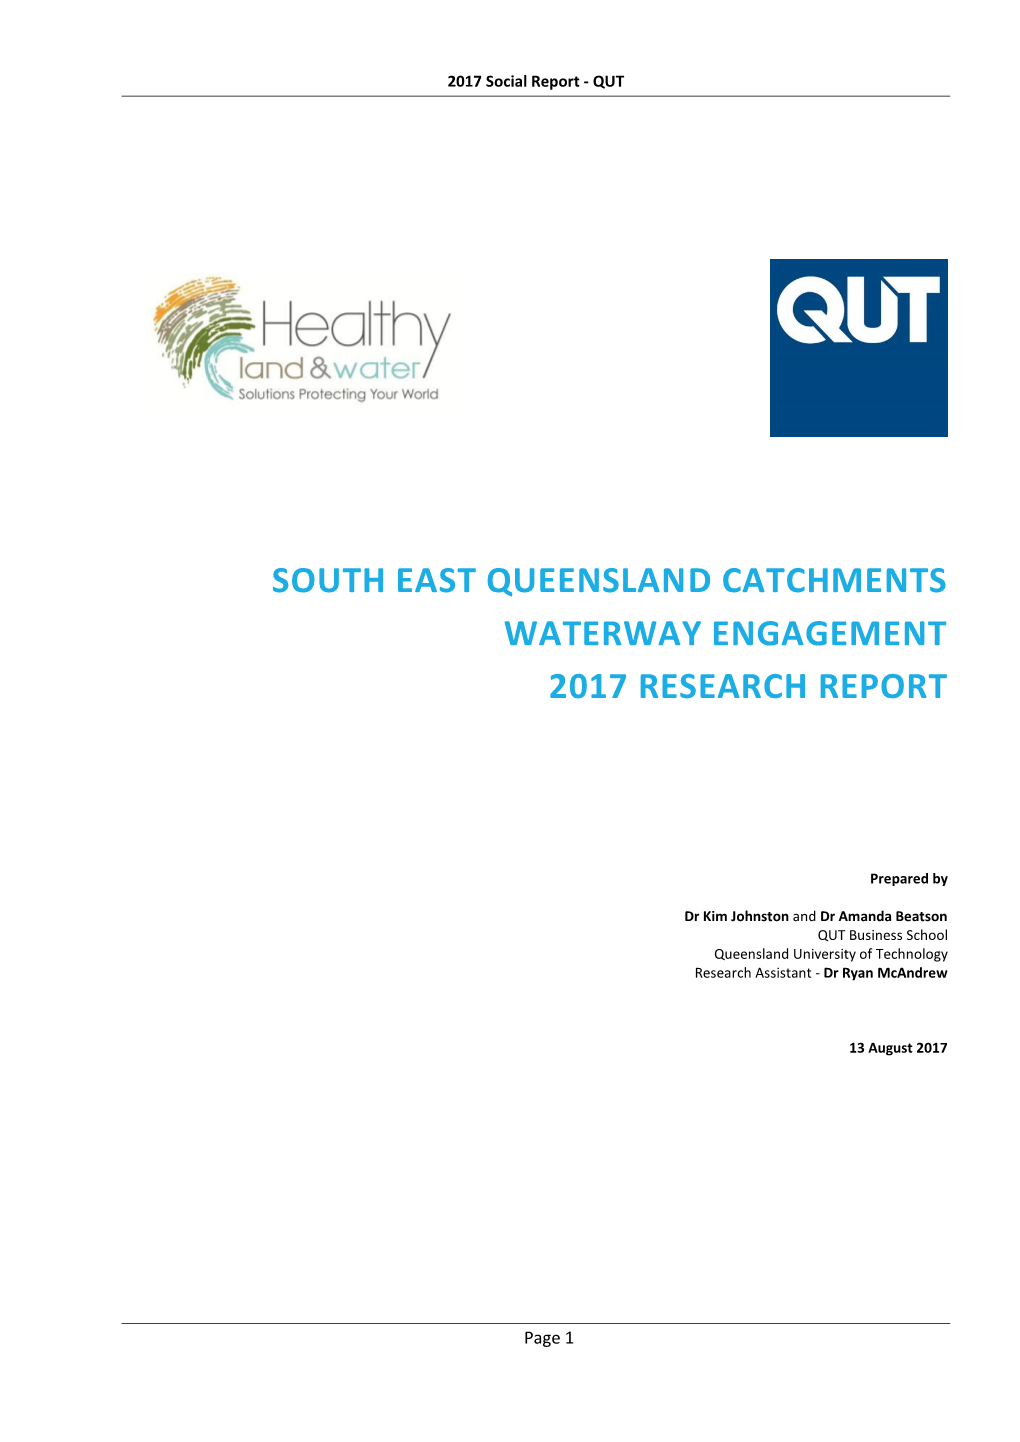 South East Queensland Catchments Waterway Engagement 2017 Research Report